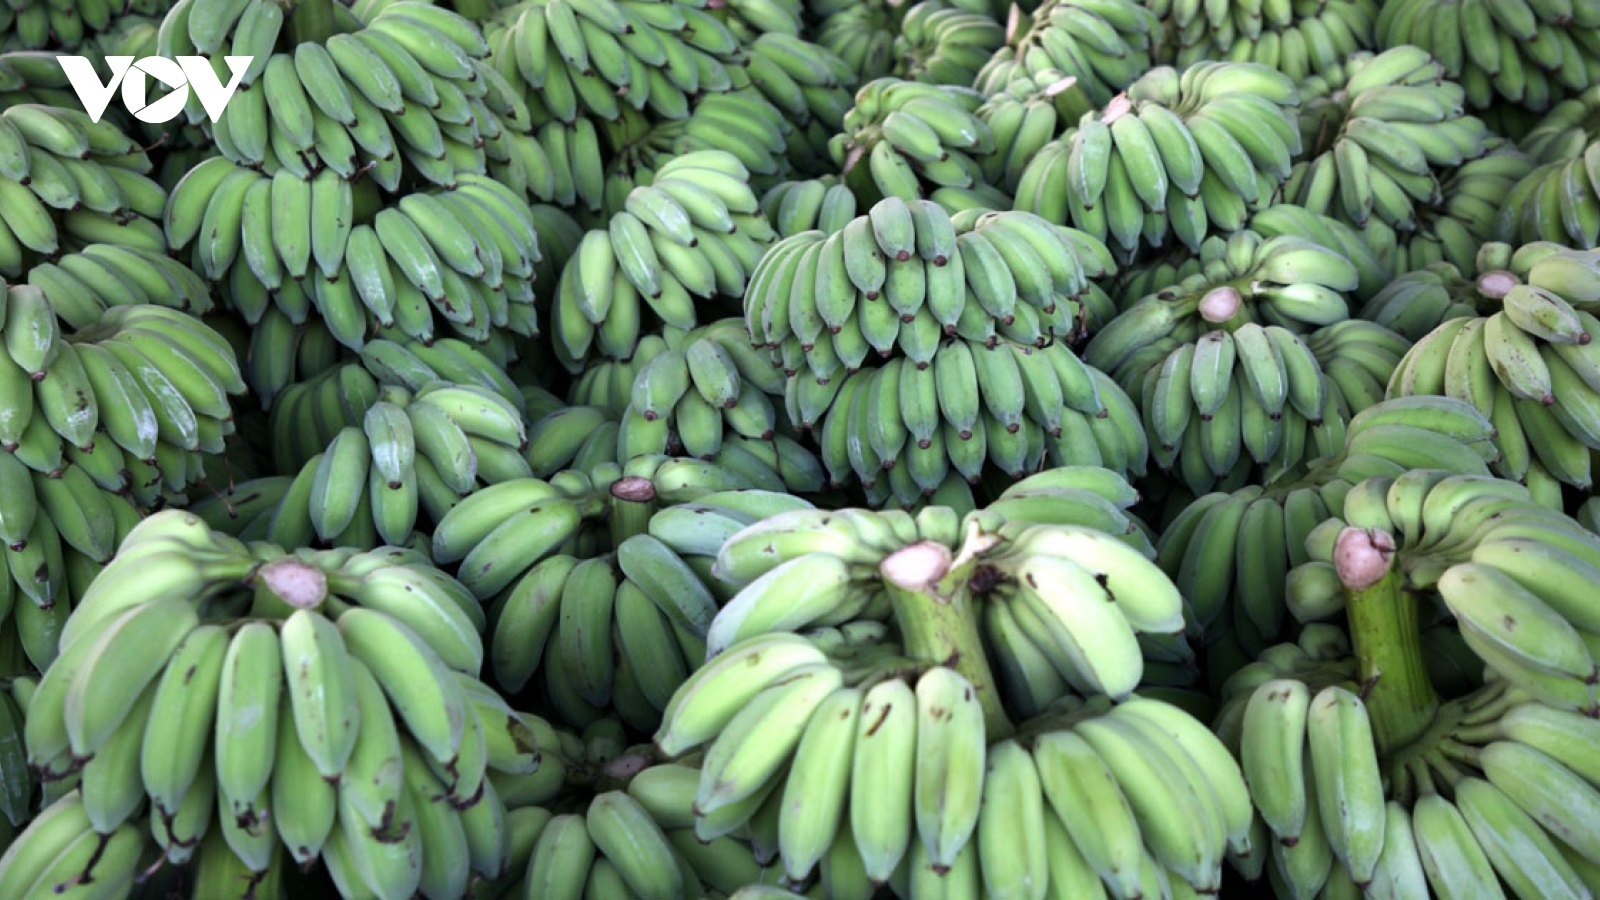 Ample room for Vietnamese banana exports in Japanese market